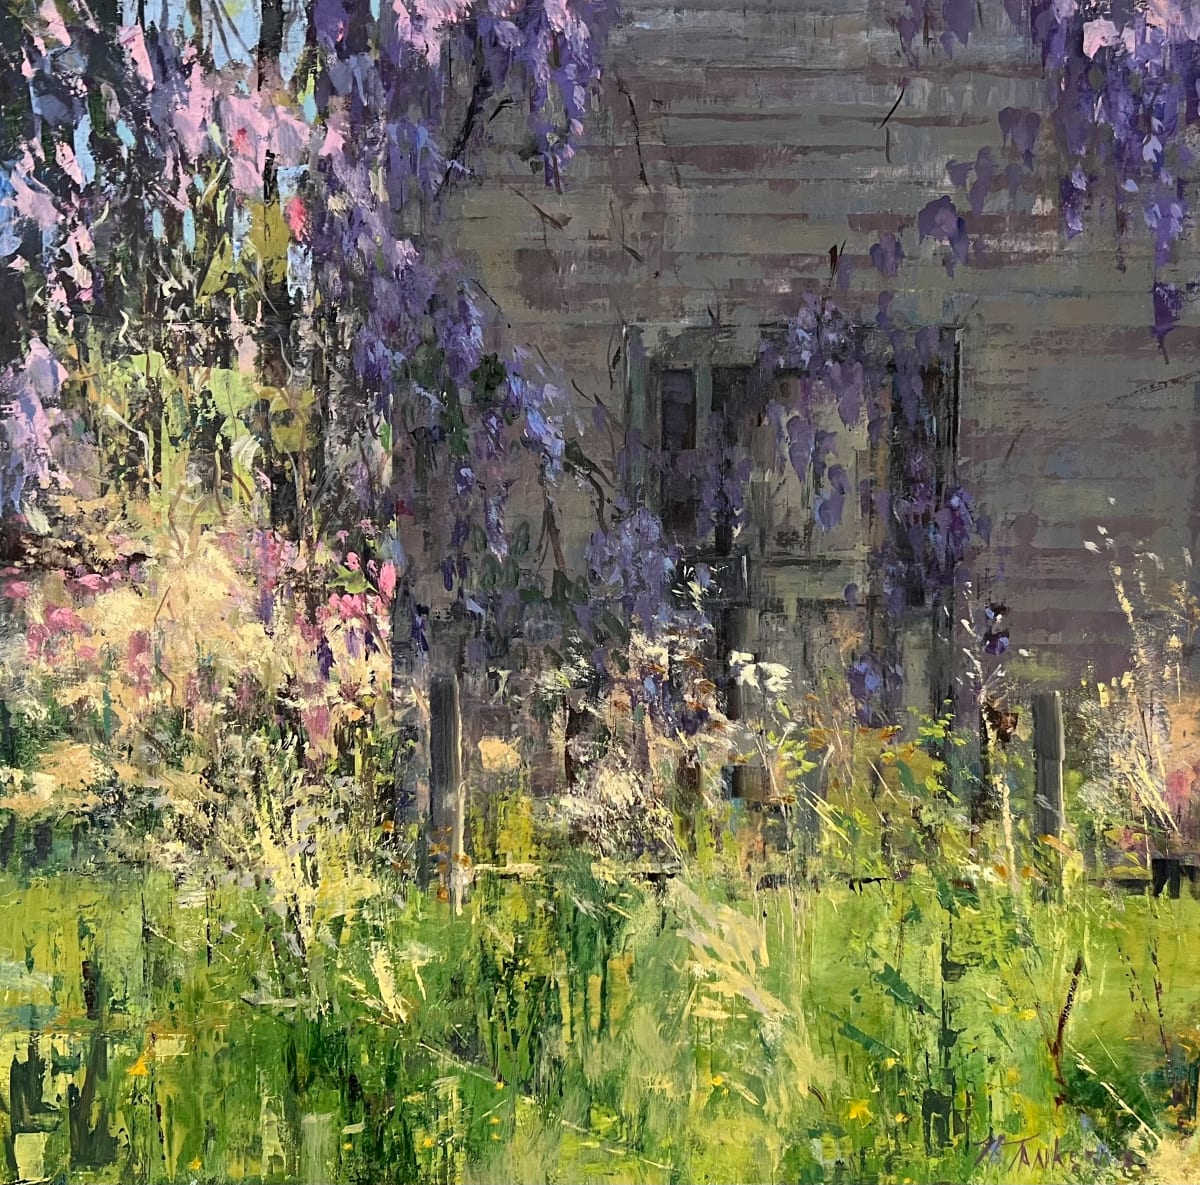 Lovely Intruder by Nancy Tankersley  Image: The wisteria was especially beautiful and vigorous this year in Southeast Virginia. Mostly painted with palette knife I wanted to express the energy and strength of the fast growing foliage around an abandoned farmhouse, which was slowly losing the battle with nature.